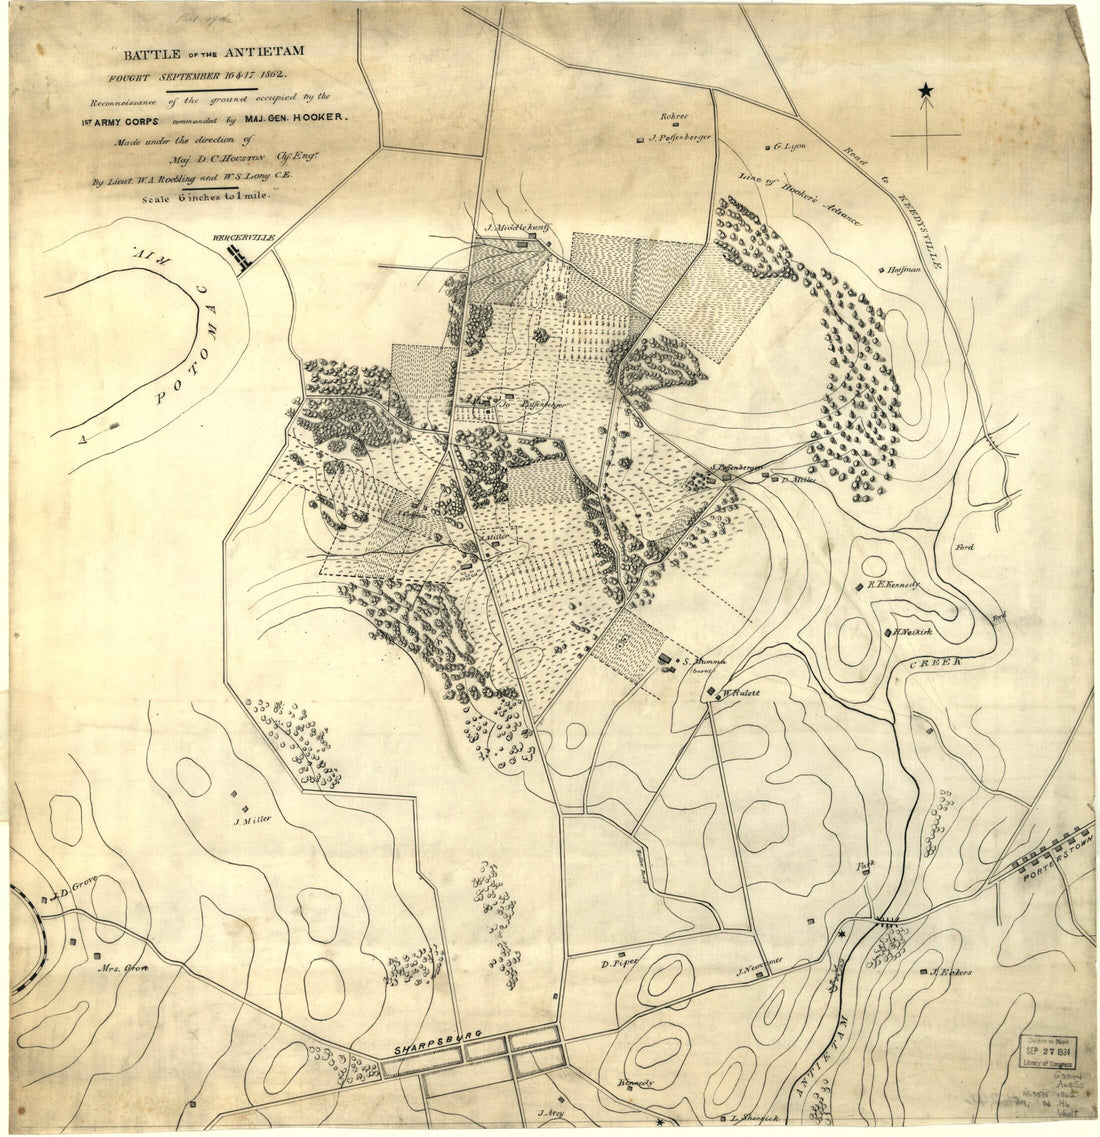 This old map of Battle of the Antietam Fought September 16 &amp; 17, from 1862 was created by W. S. Long, Washington A. Roebling in 1862